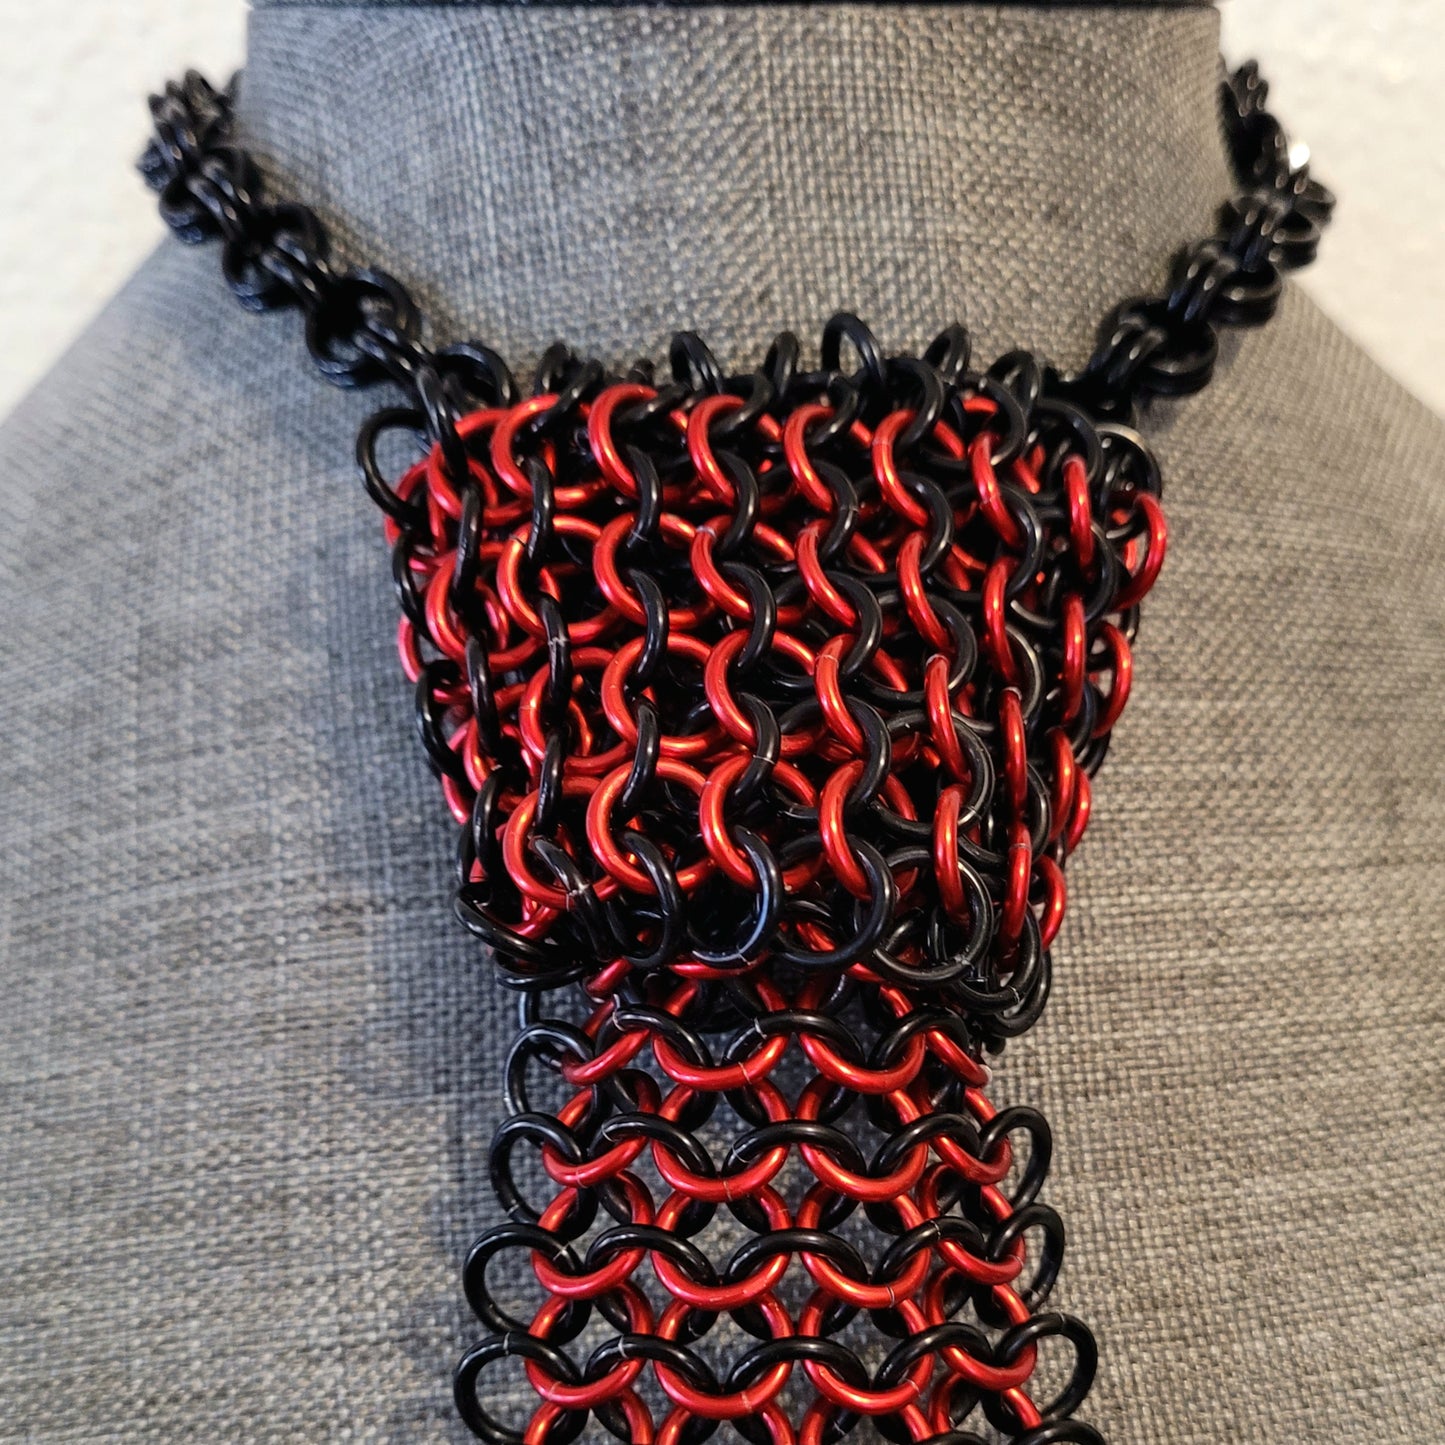 Chainmaille Tie